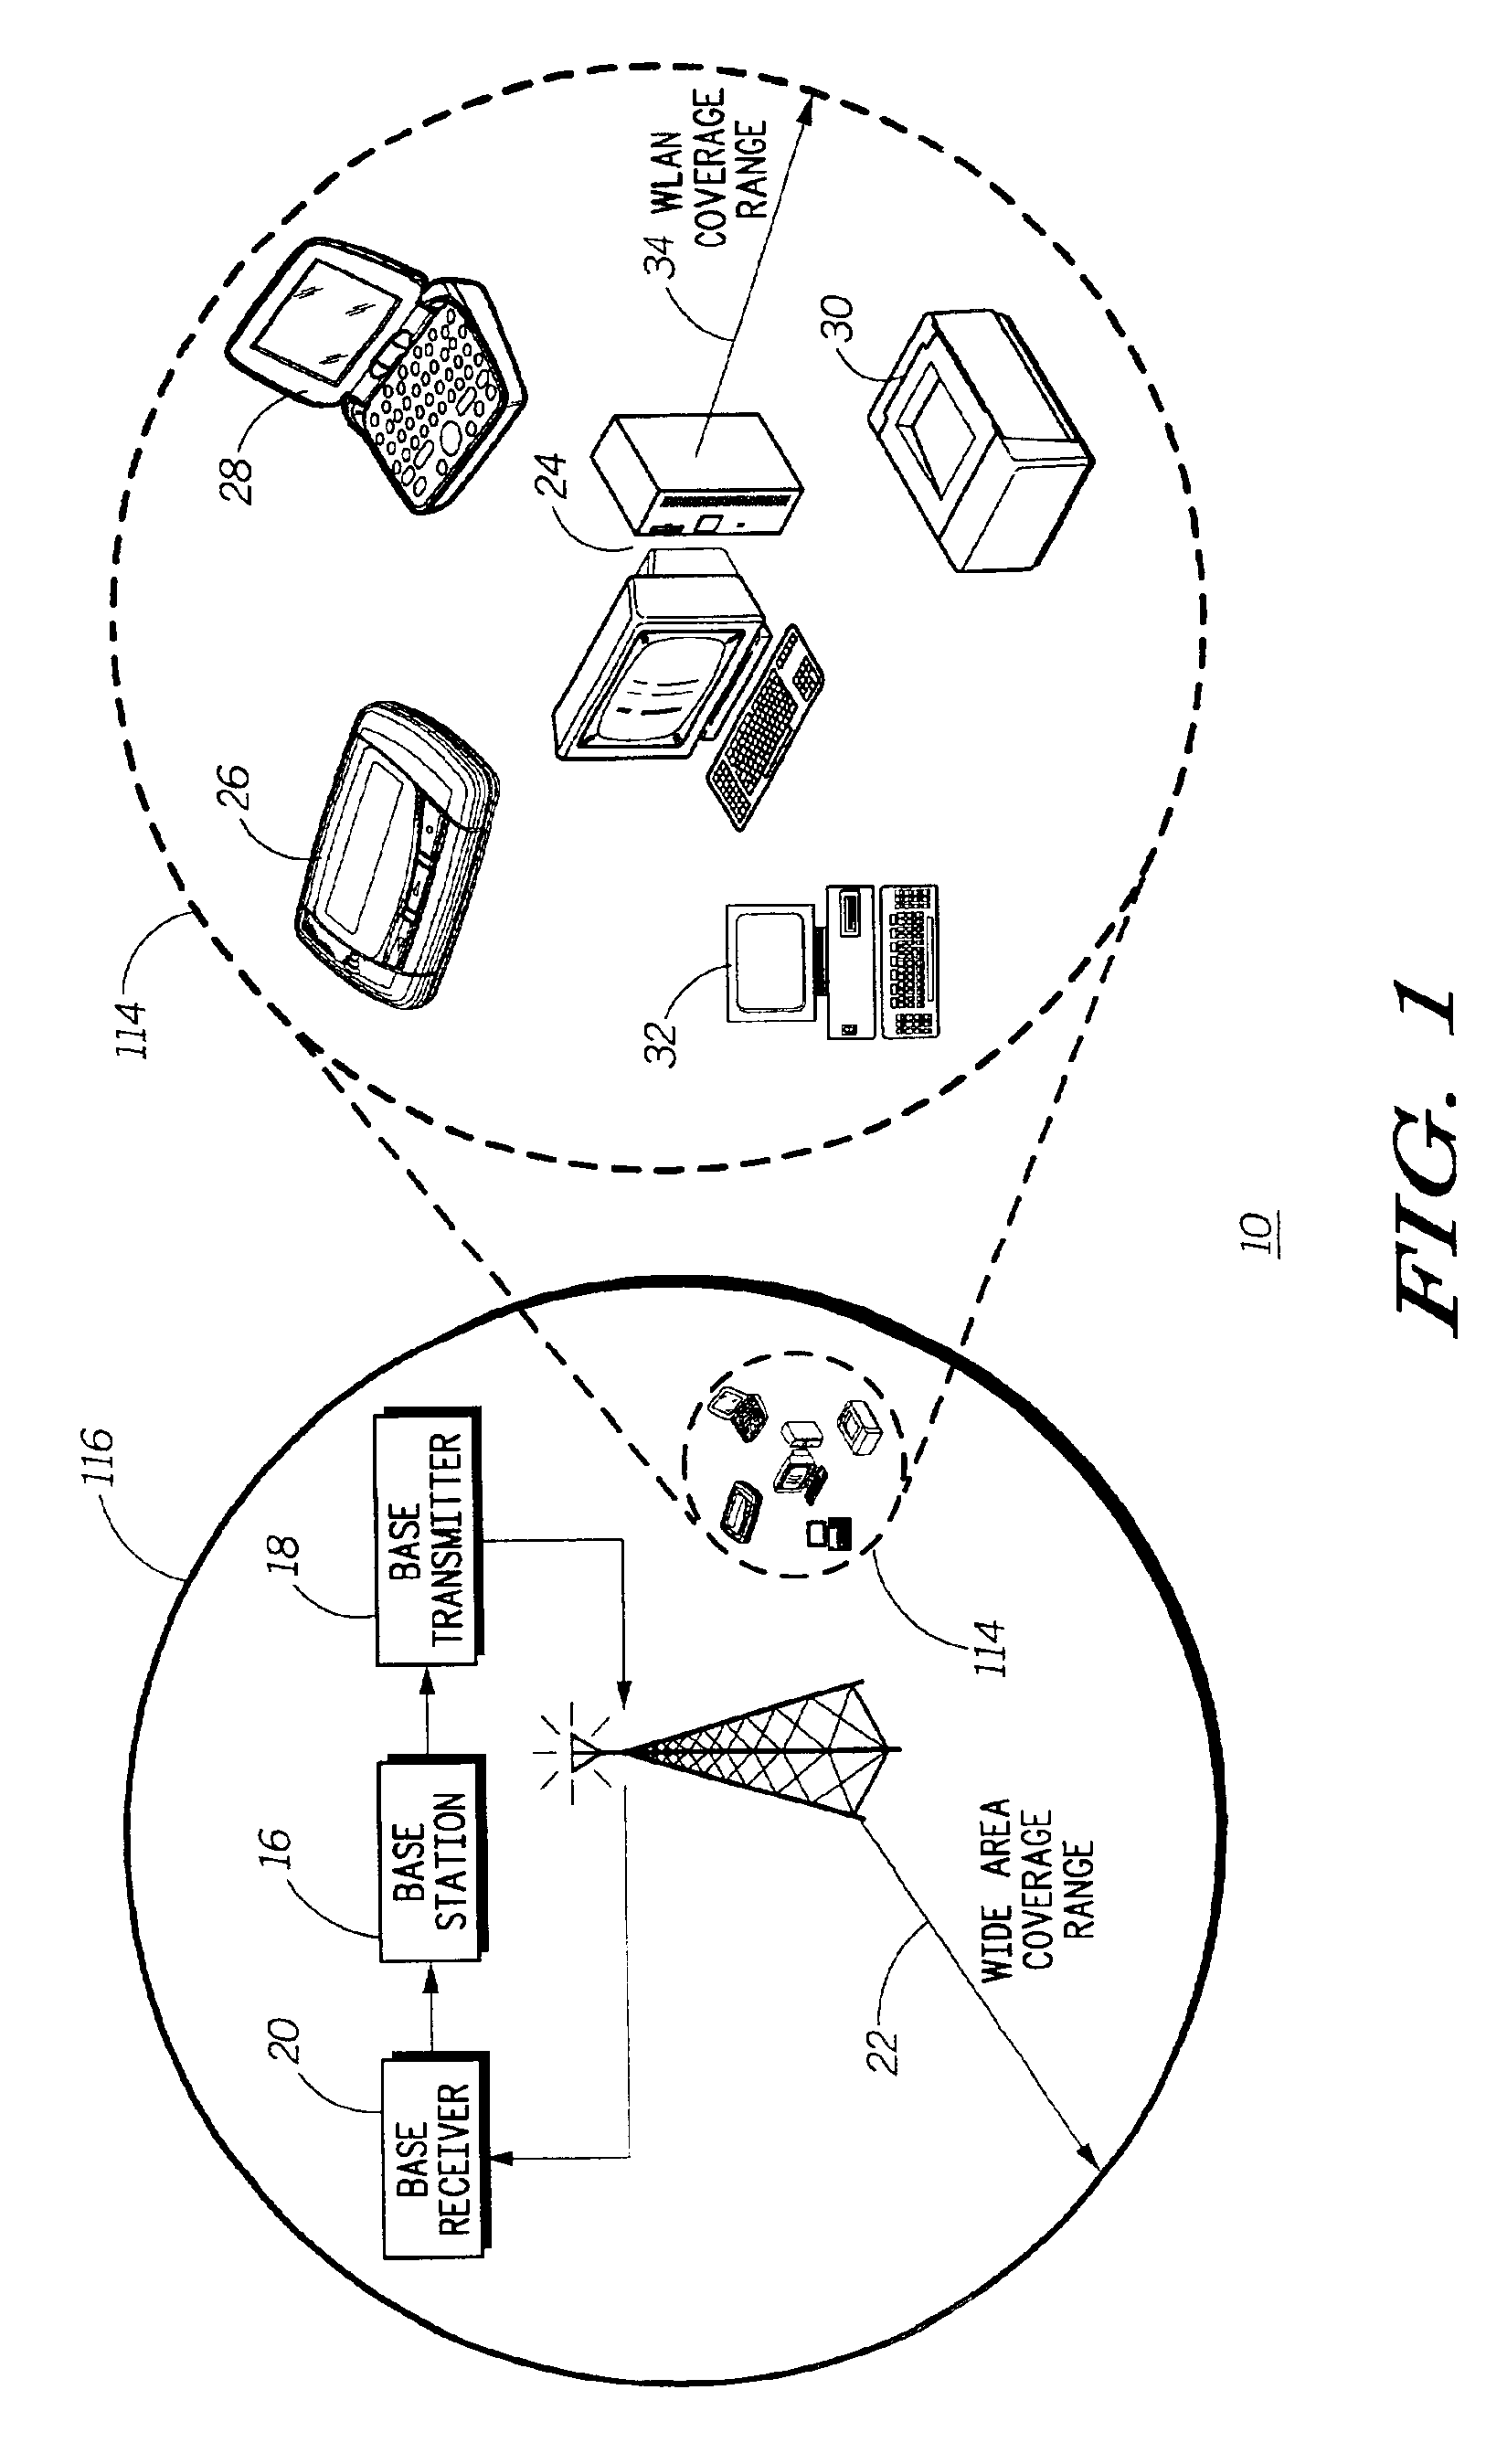 Communication system for location sensitive information and method therefor